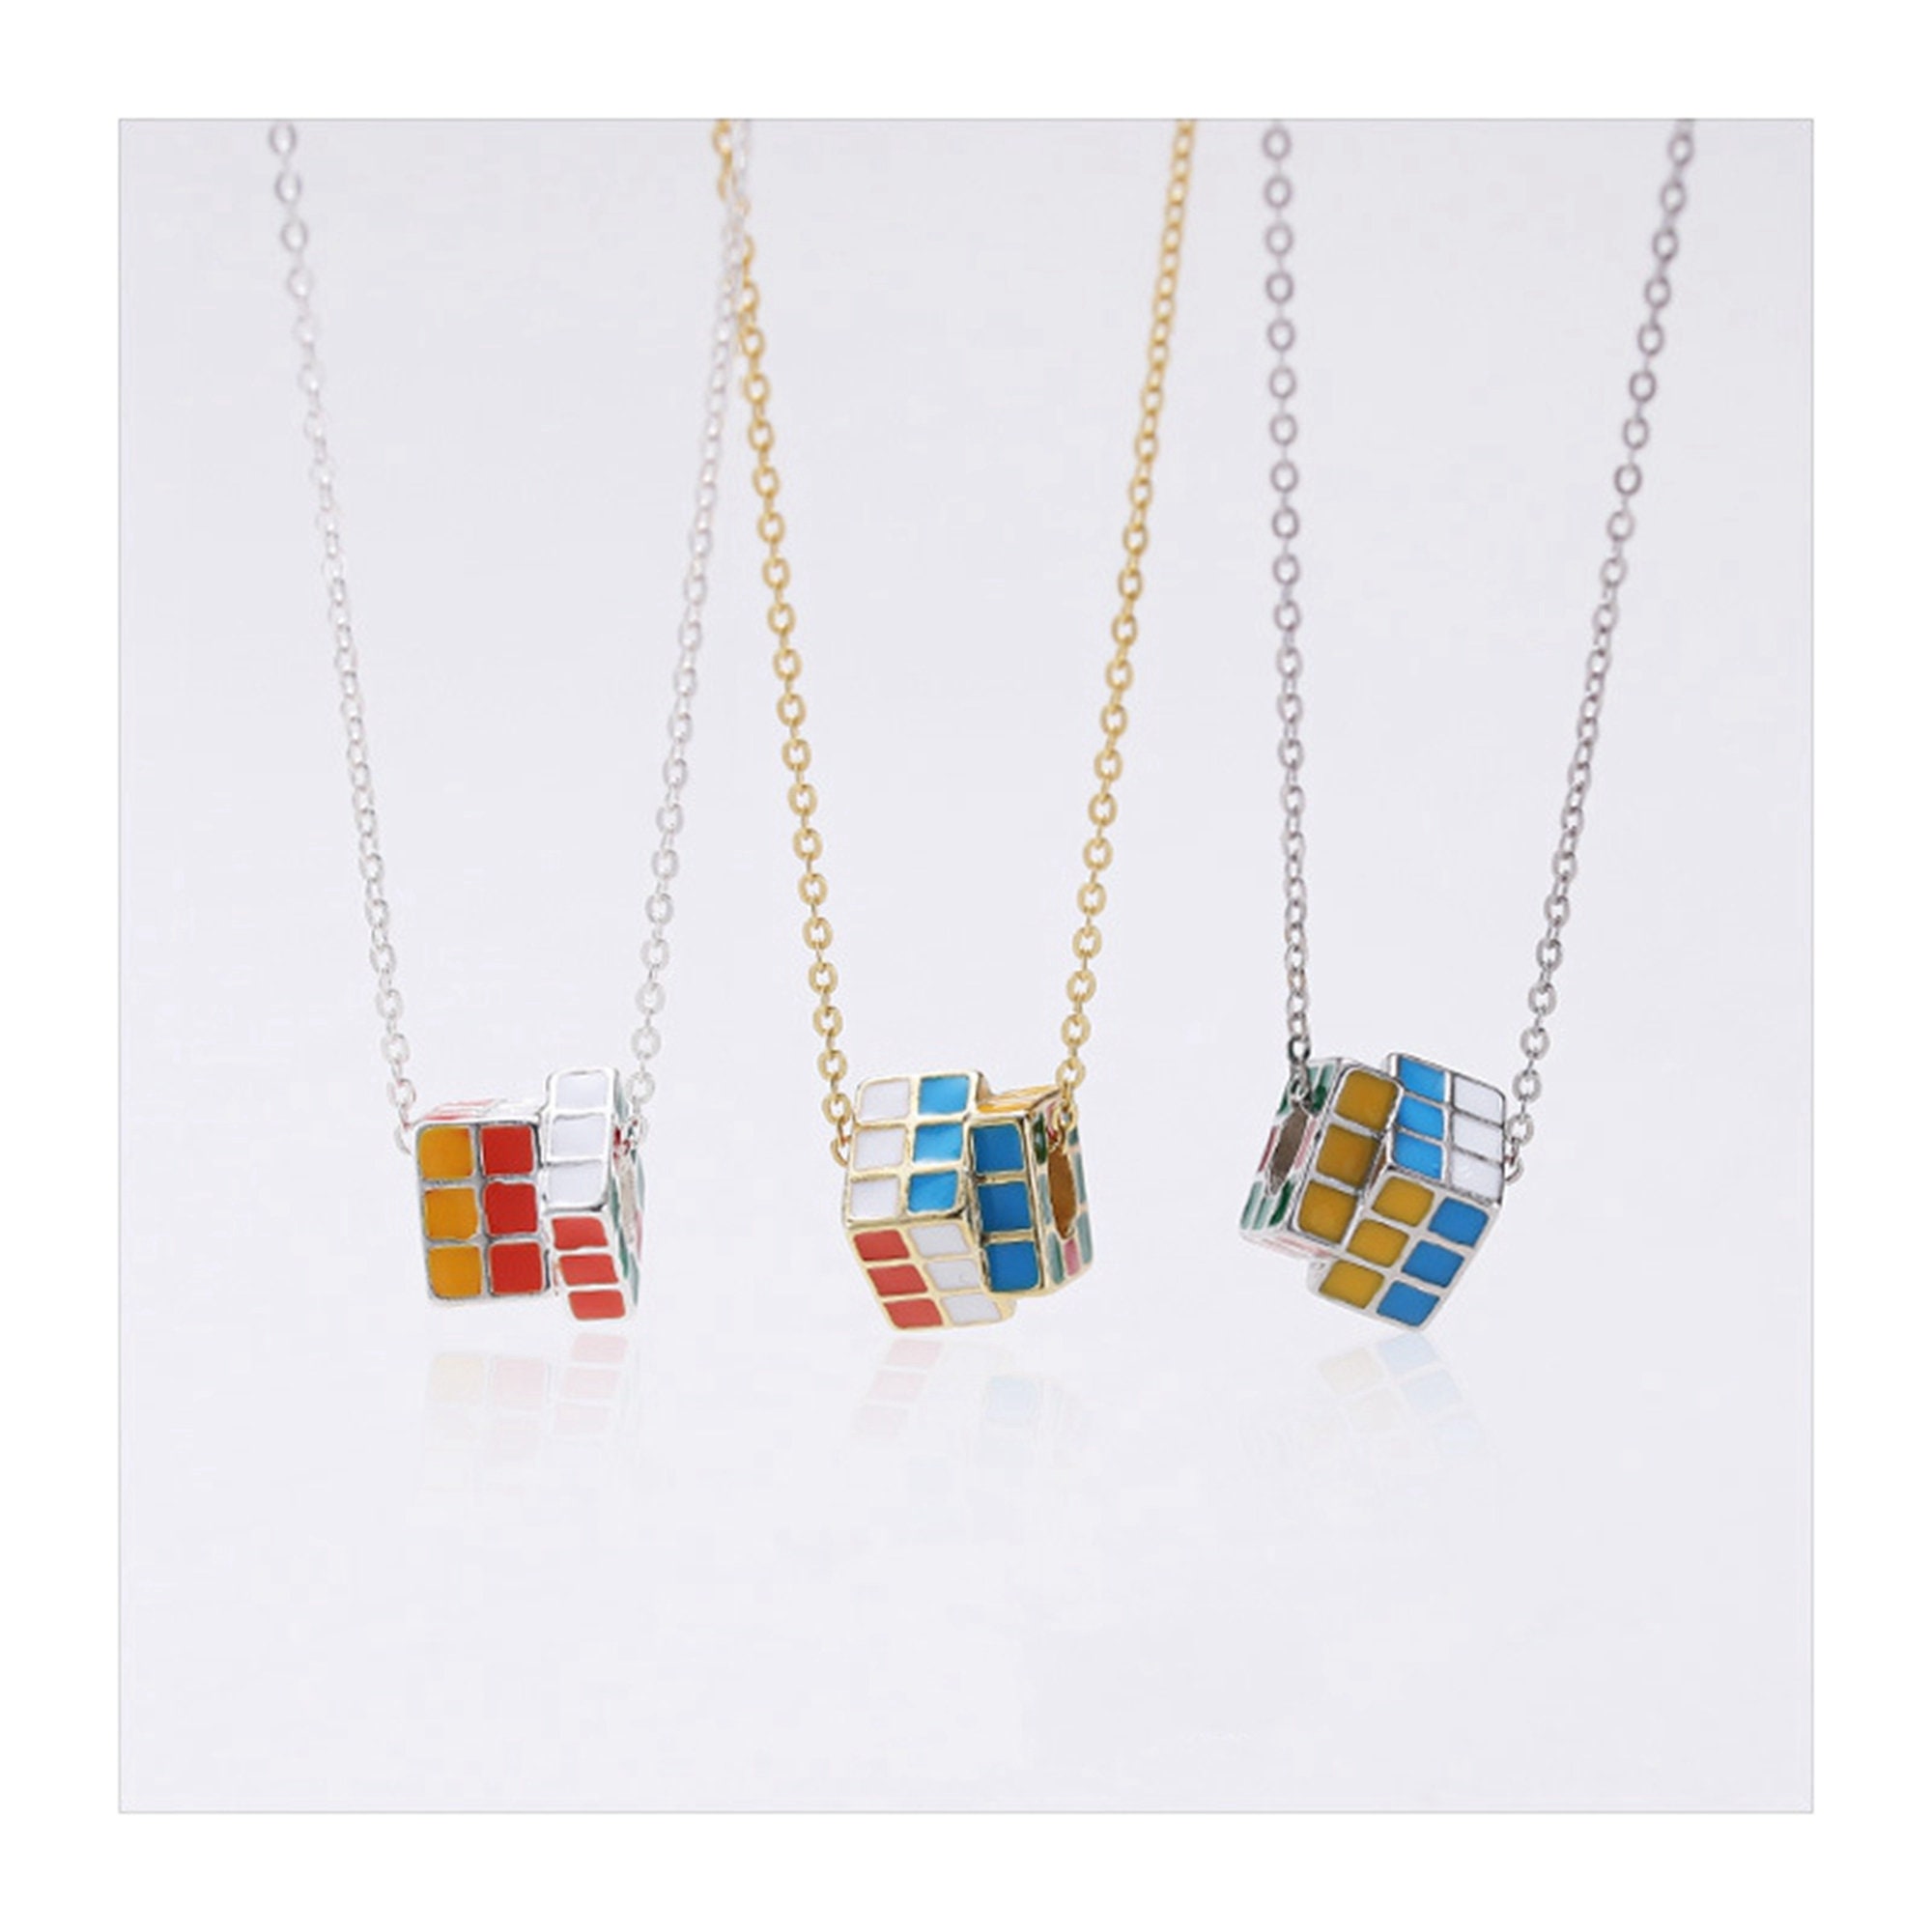 Puzzle Cube Necklace Pendant with Bow - Retro 80's Cosplay Joe Cool | eBay